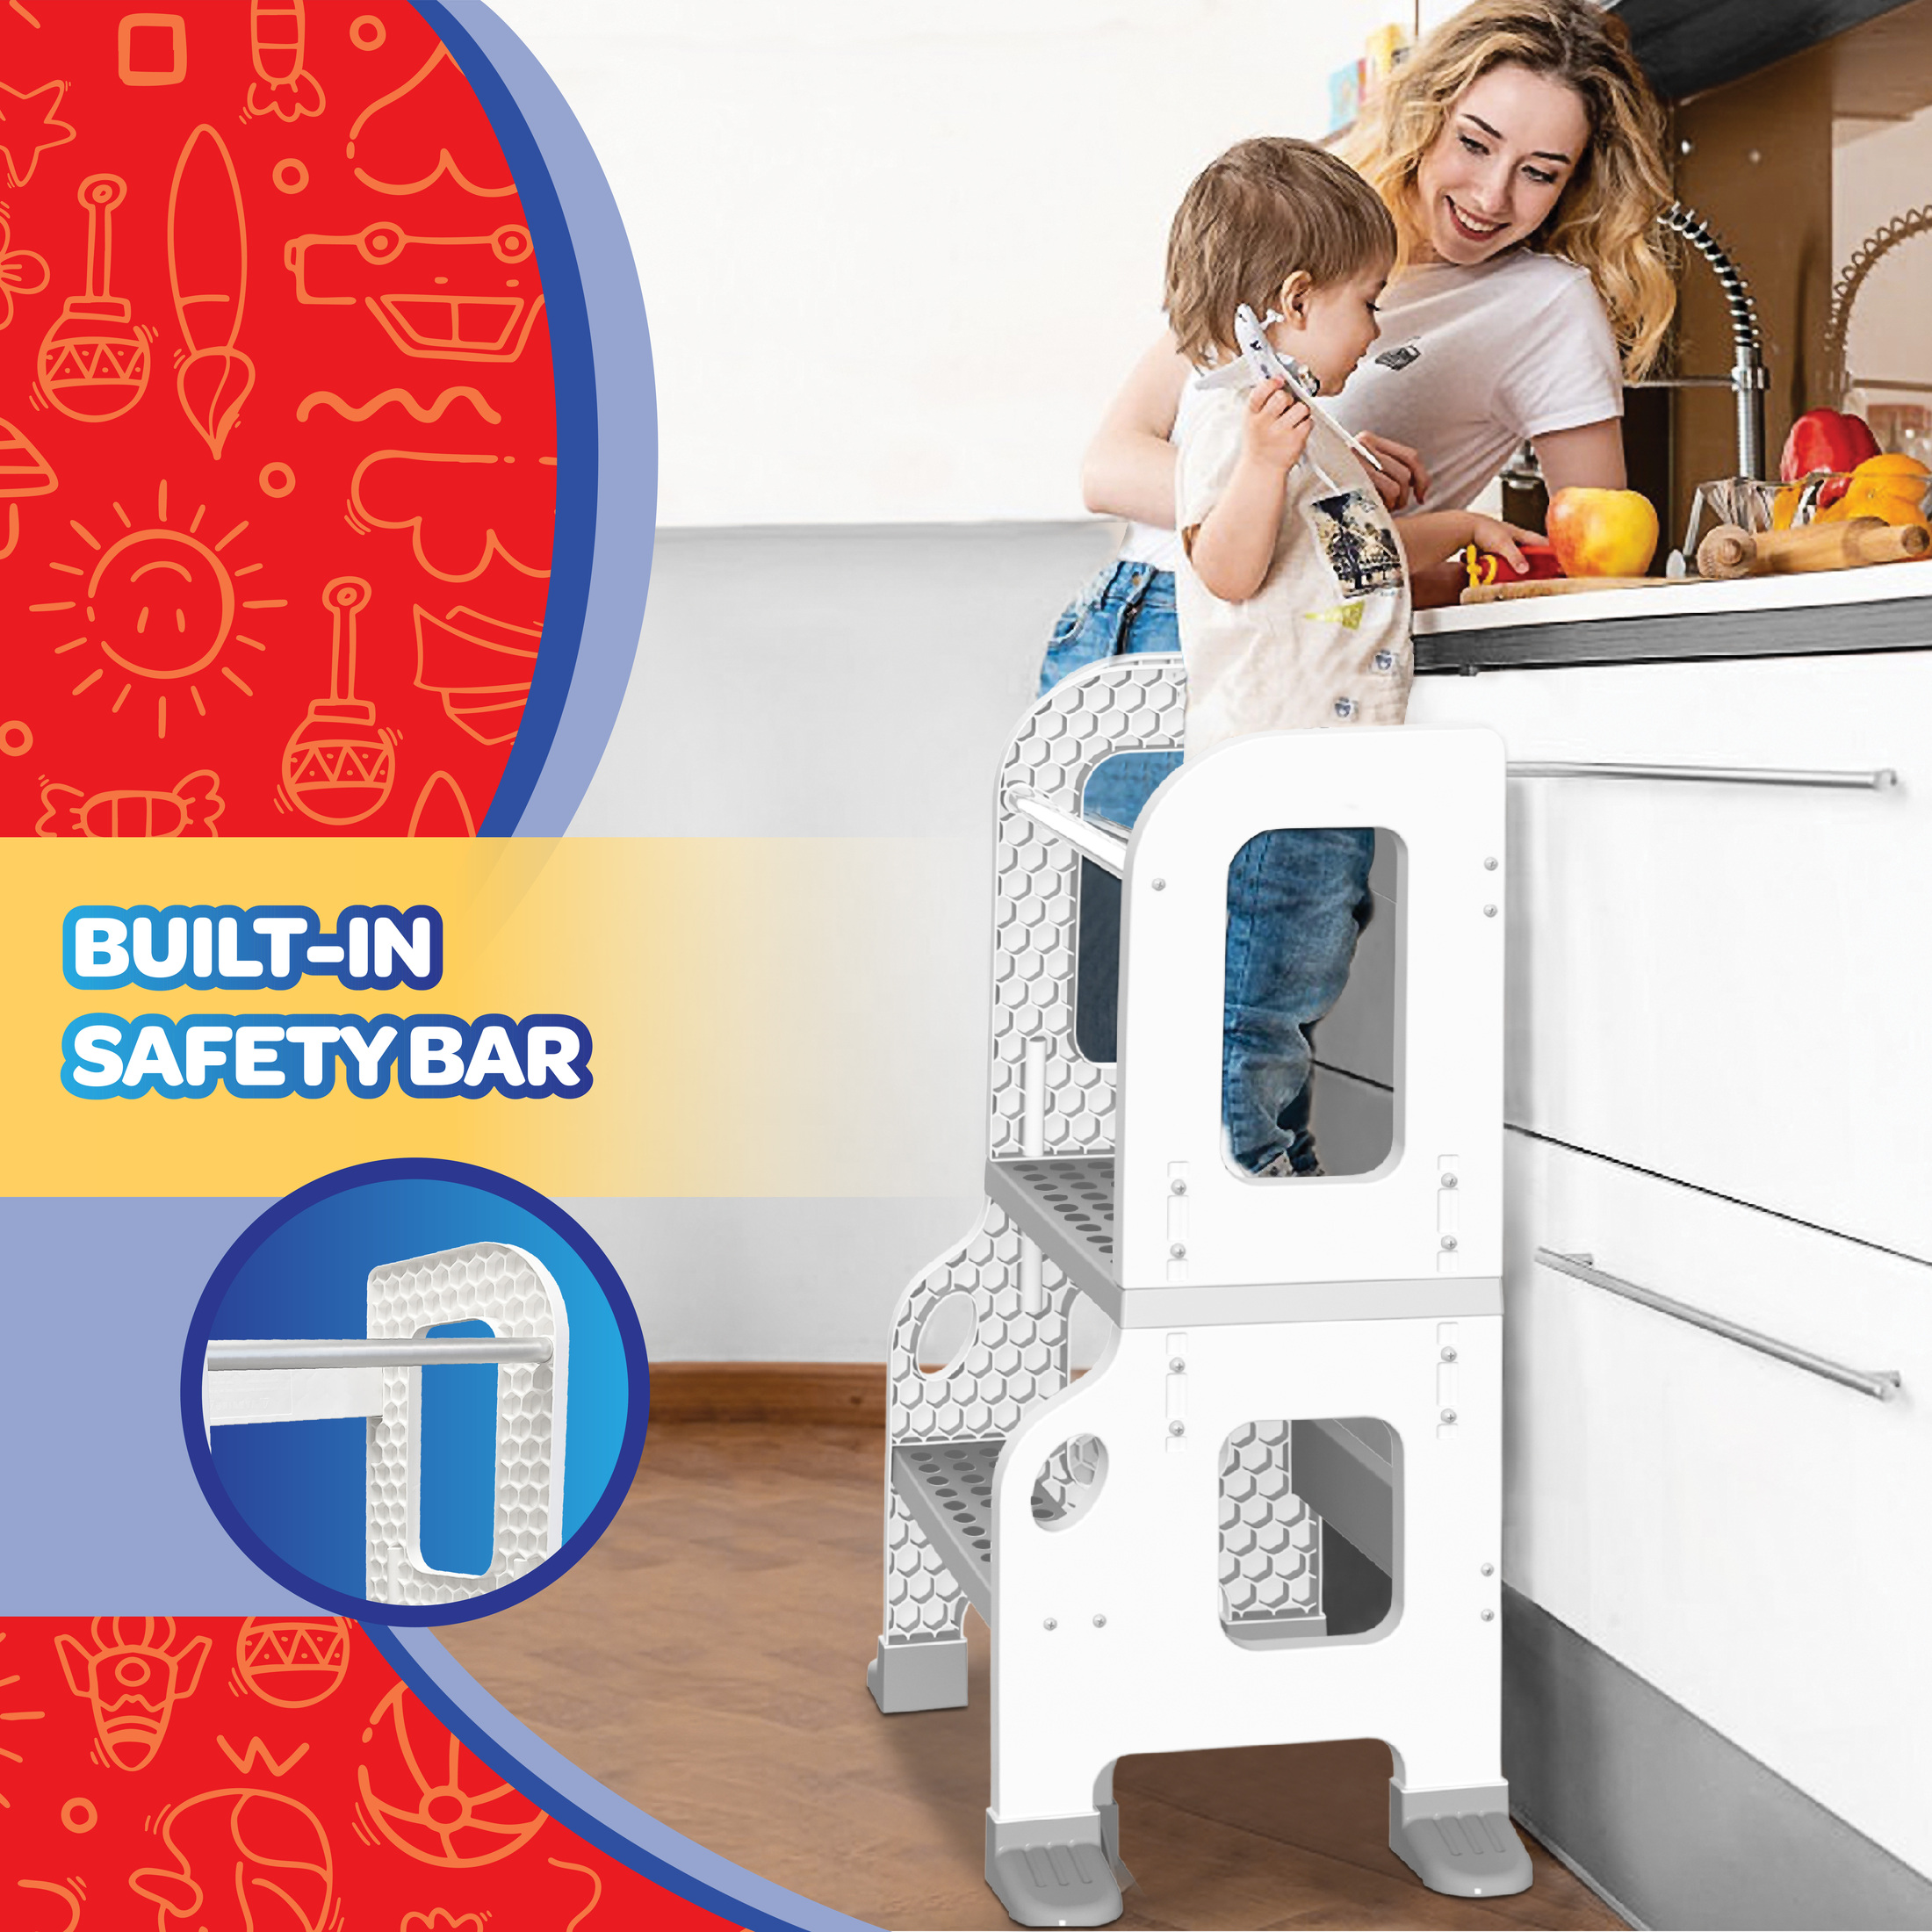 CORE PACIFIC Kitchen Buddy 2-in-1 Stool for Ages 1-3 safe up to 100 lbs. - image 3 of 7